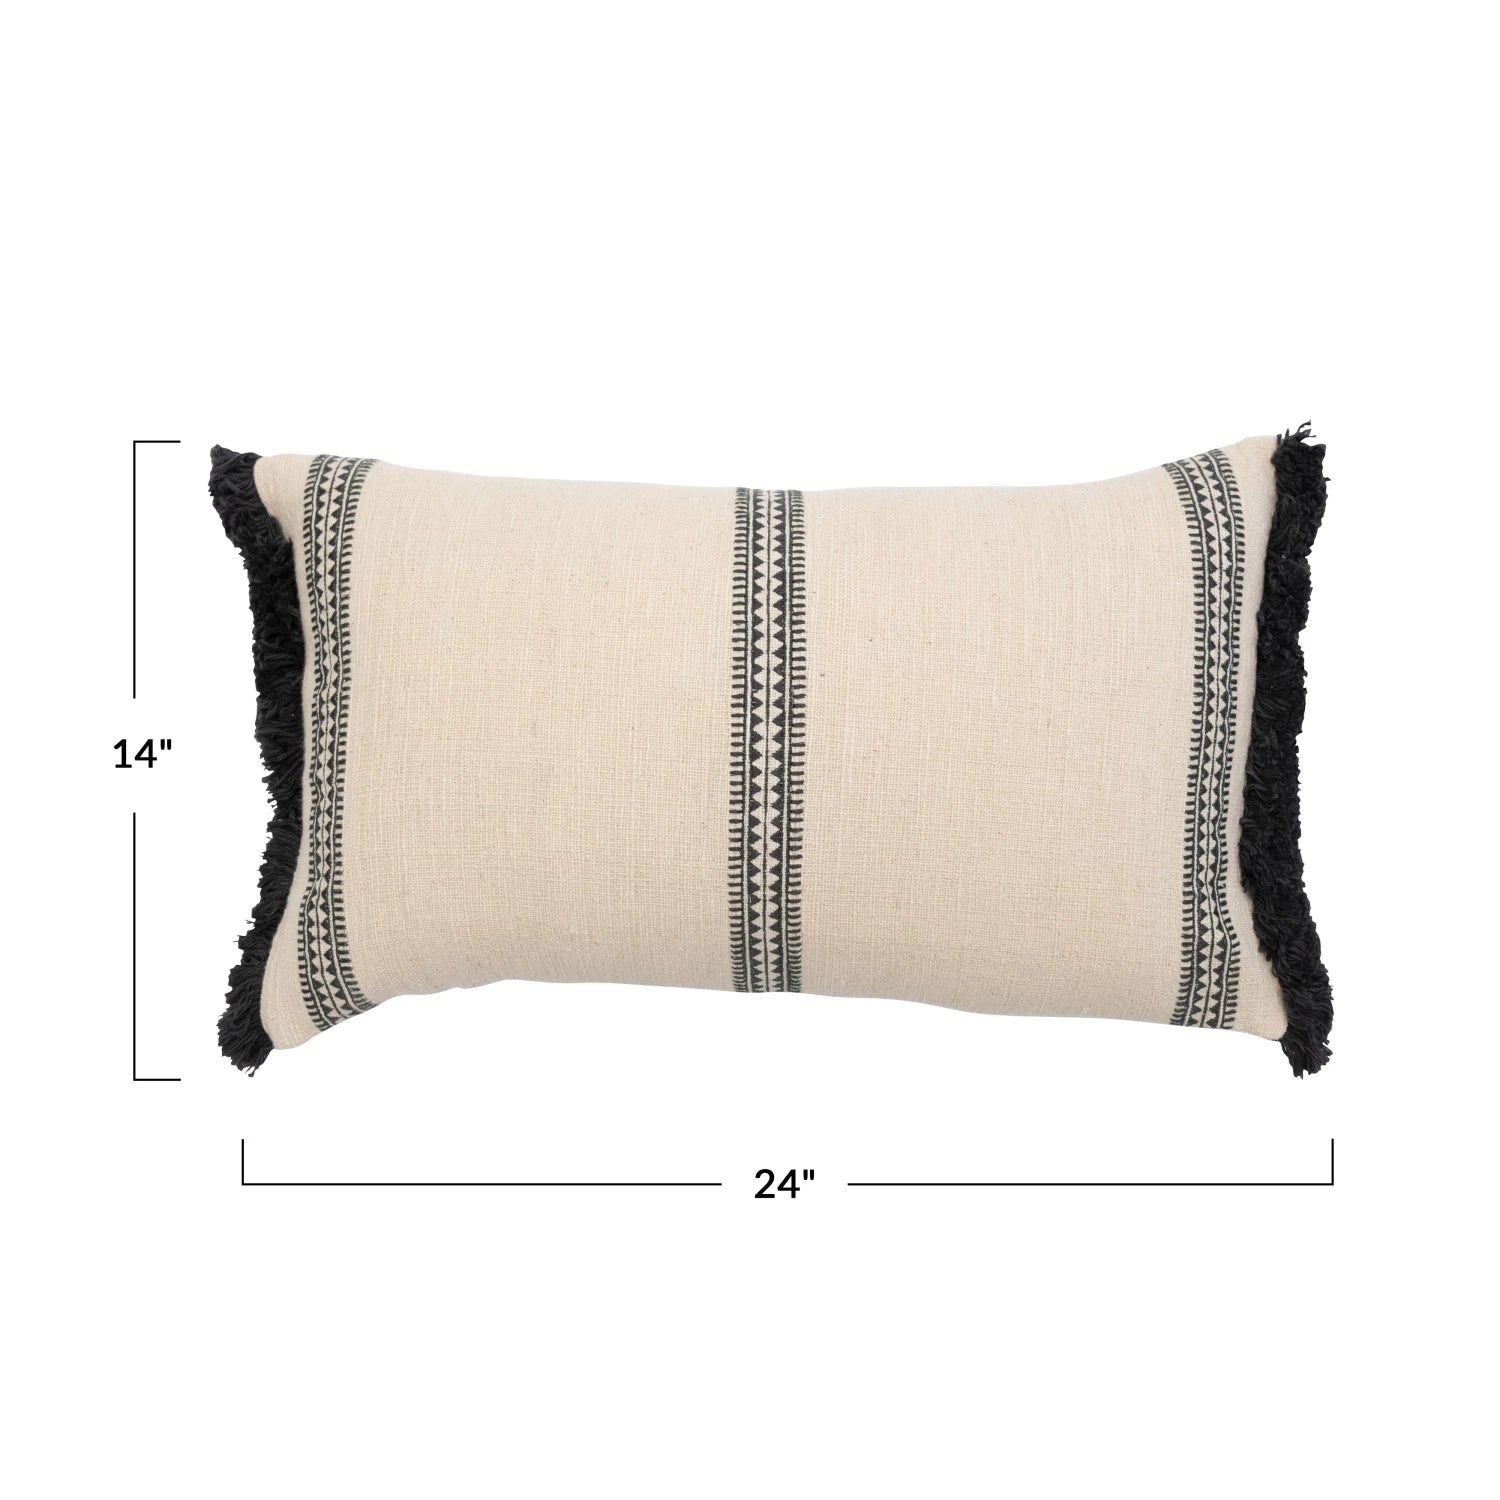 Charcoal & Cream Lumbar Pillow w/ Embroidered Stripes & Fringe